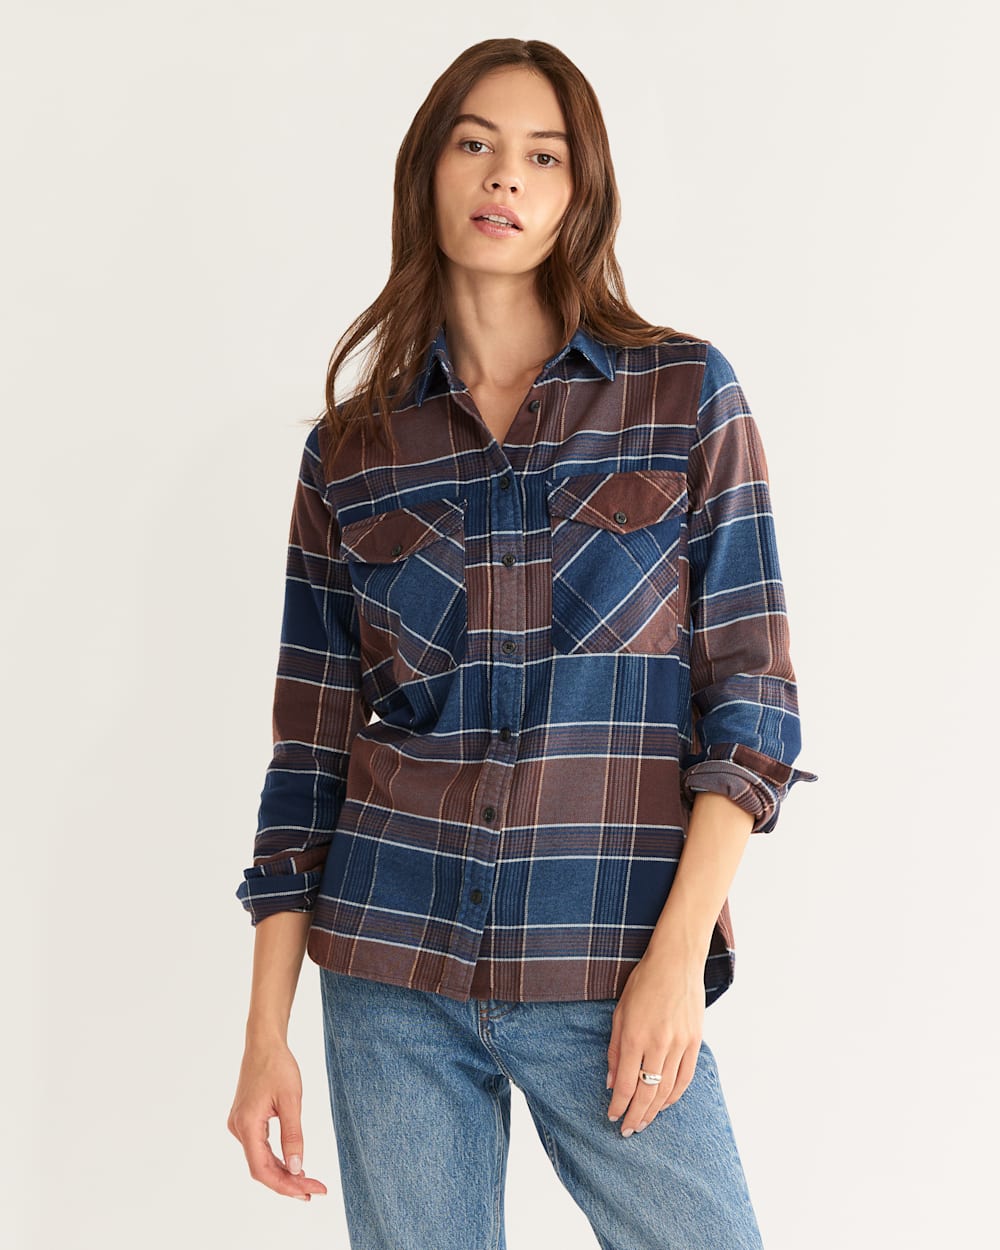 WOMEN'S MADISON DOUBLE-BRUSHED FLANNEL SHIRT IN BROWN/TURQUOISE MULTI PLAID image number 1